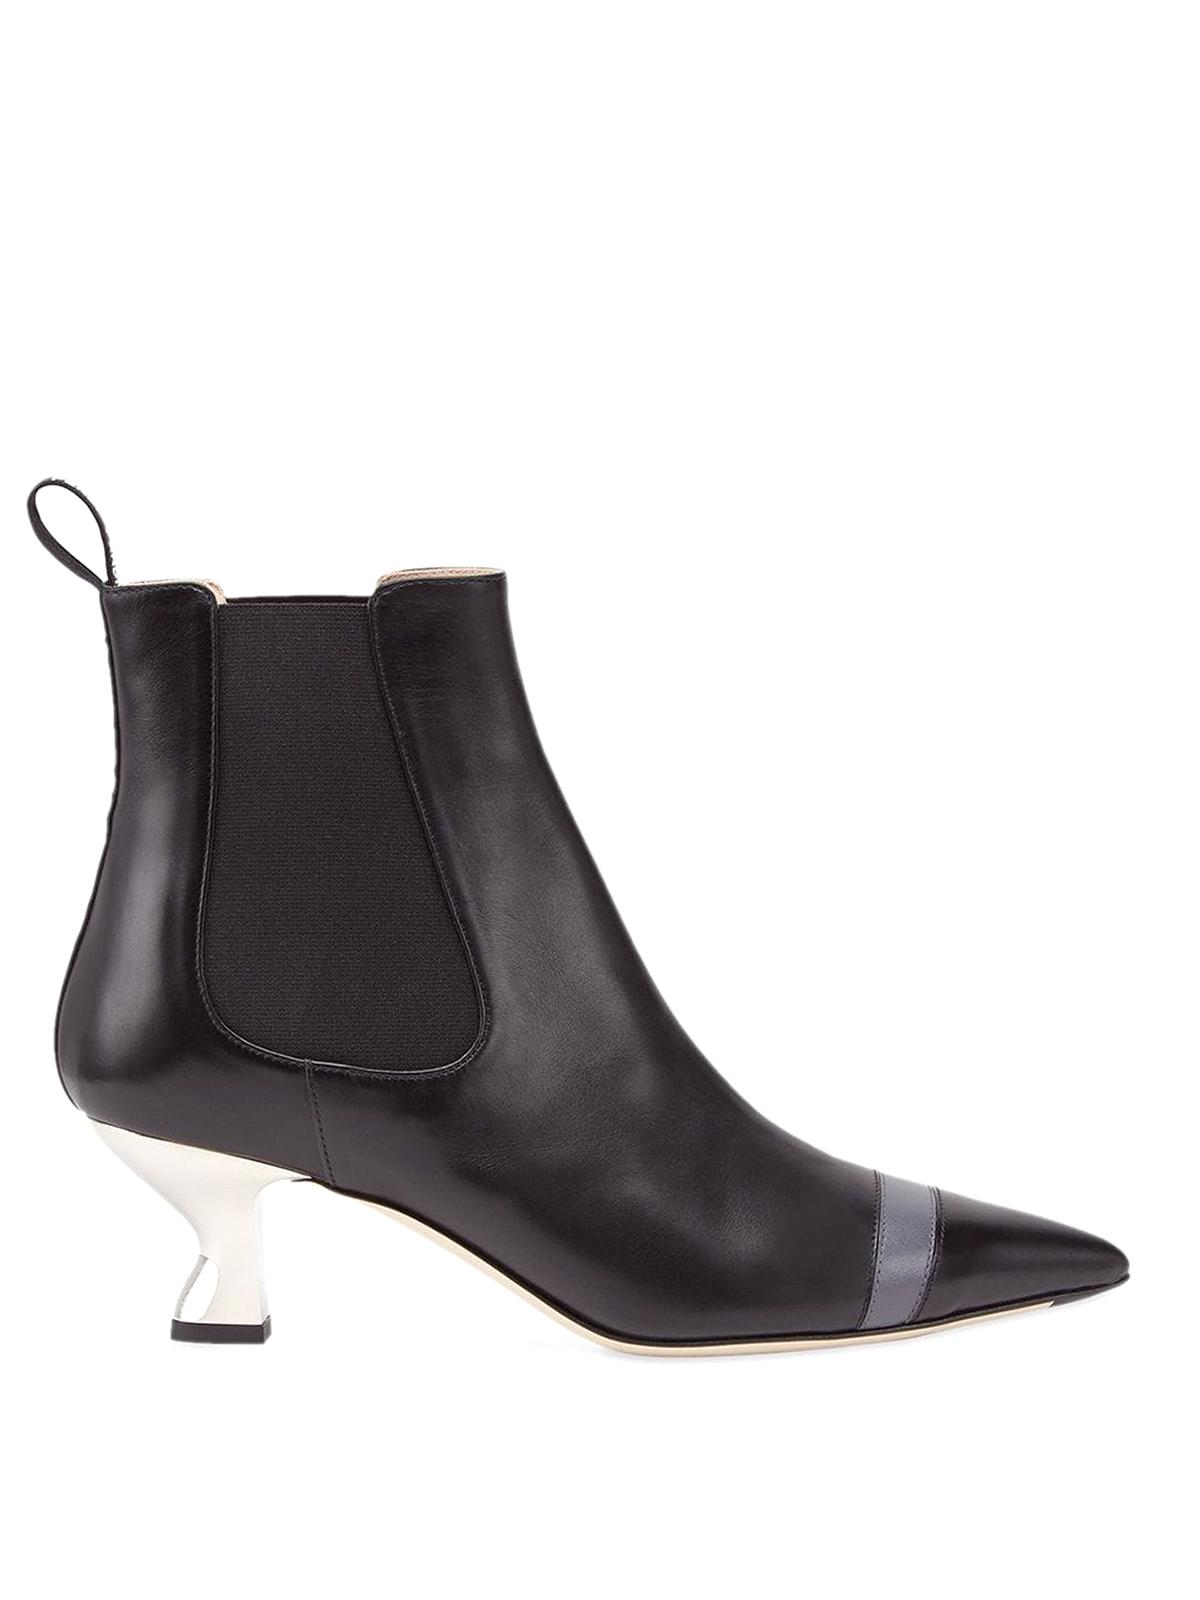 Fendi Leather Heeled Ankle Boots in 